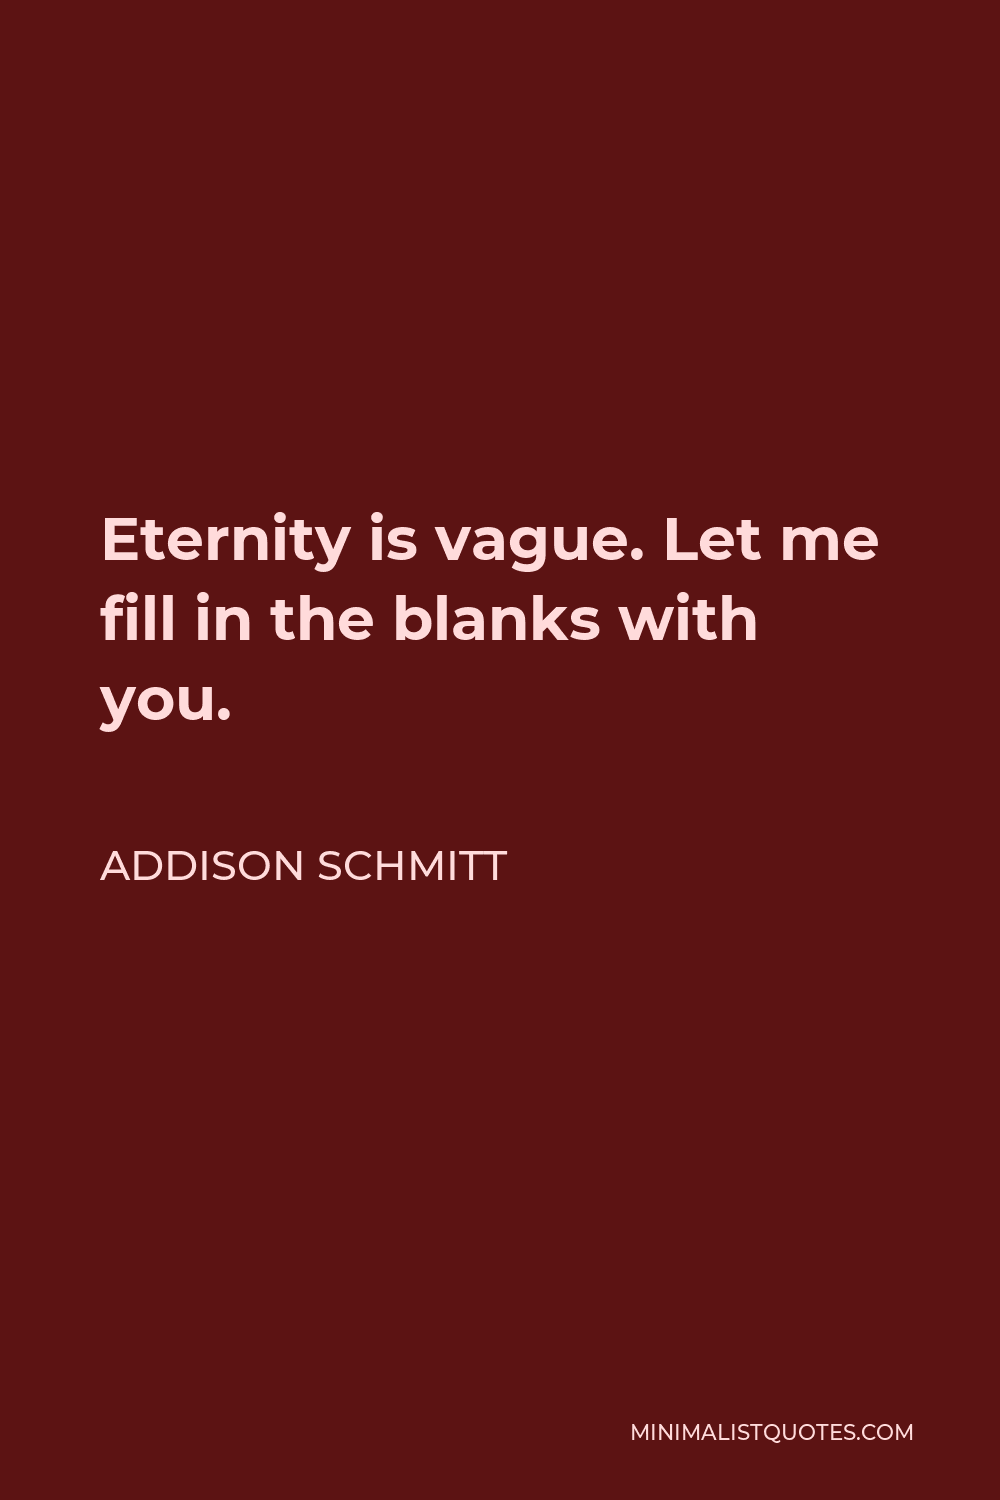 Addison Schmitt Quote - Eternity is vague. Let me fill in the blanks with you.